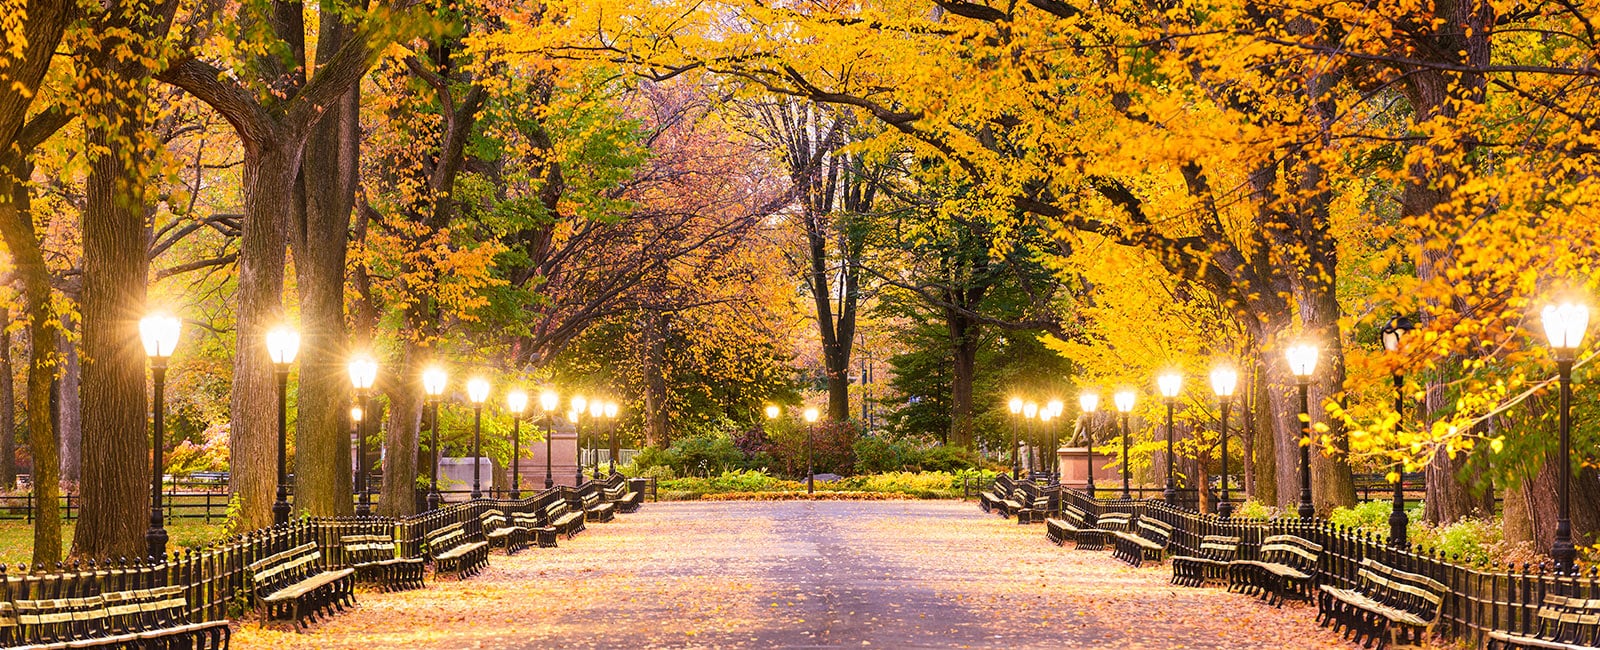 Enjoy a vacation in New York near Central Park with Hilton Grand Vacations